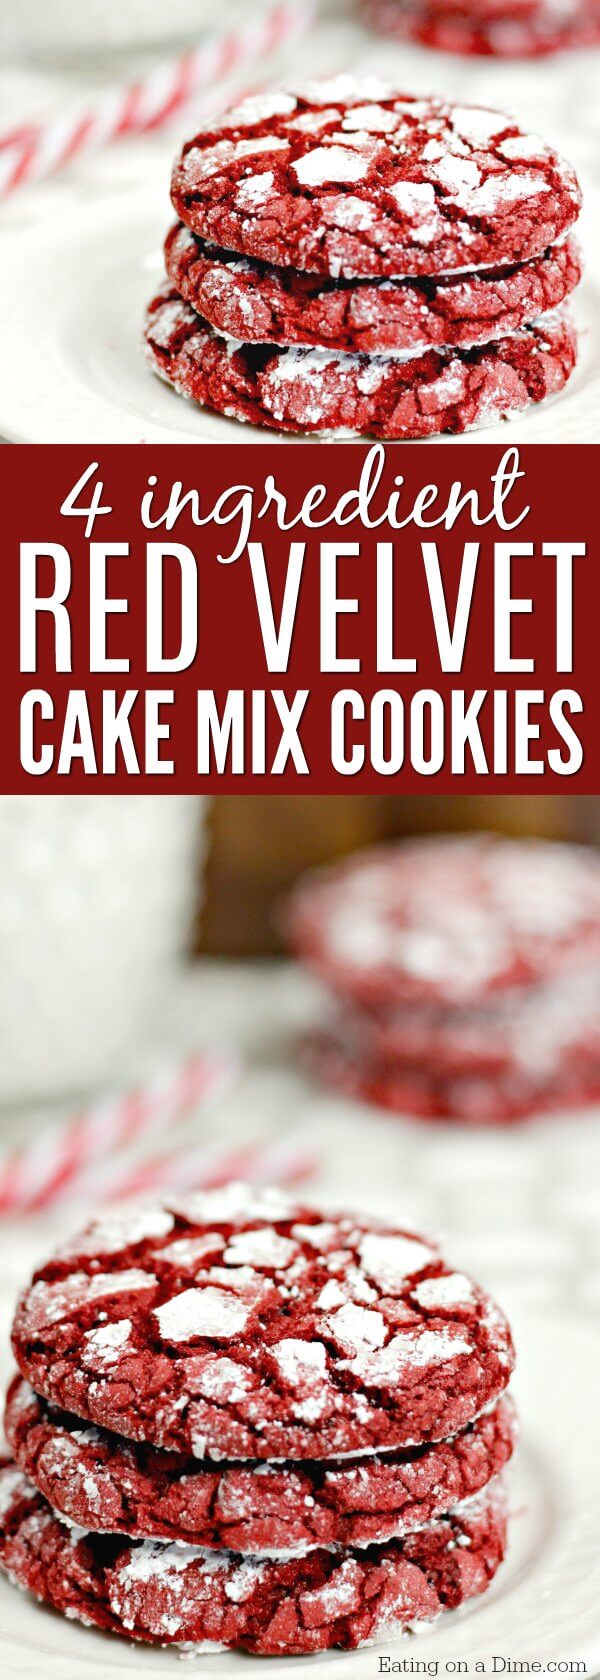 This Red Velvet Cookies Recipe is easy to make because you only need 4 ingredients. Easy Red velvet crinkle cookies are the best cake mix cookies!